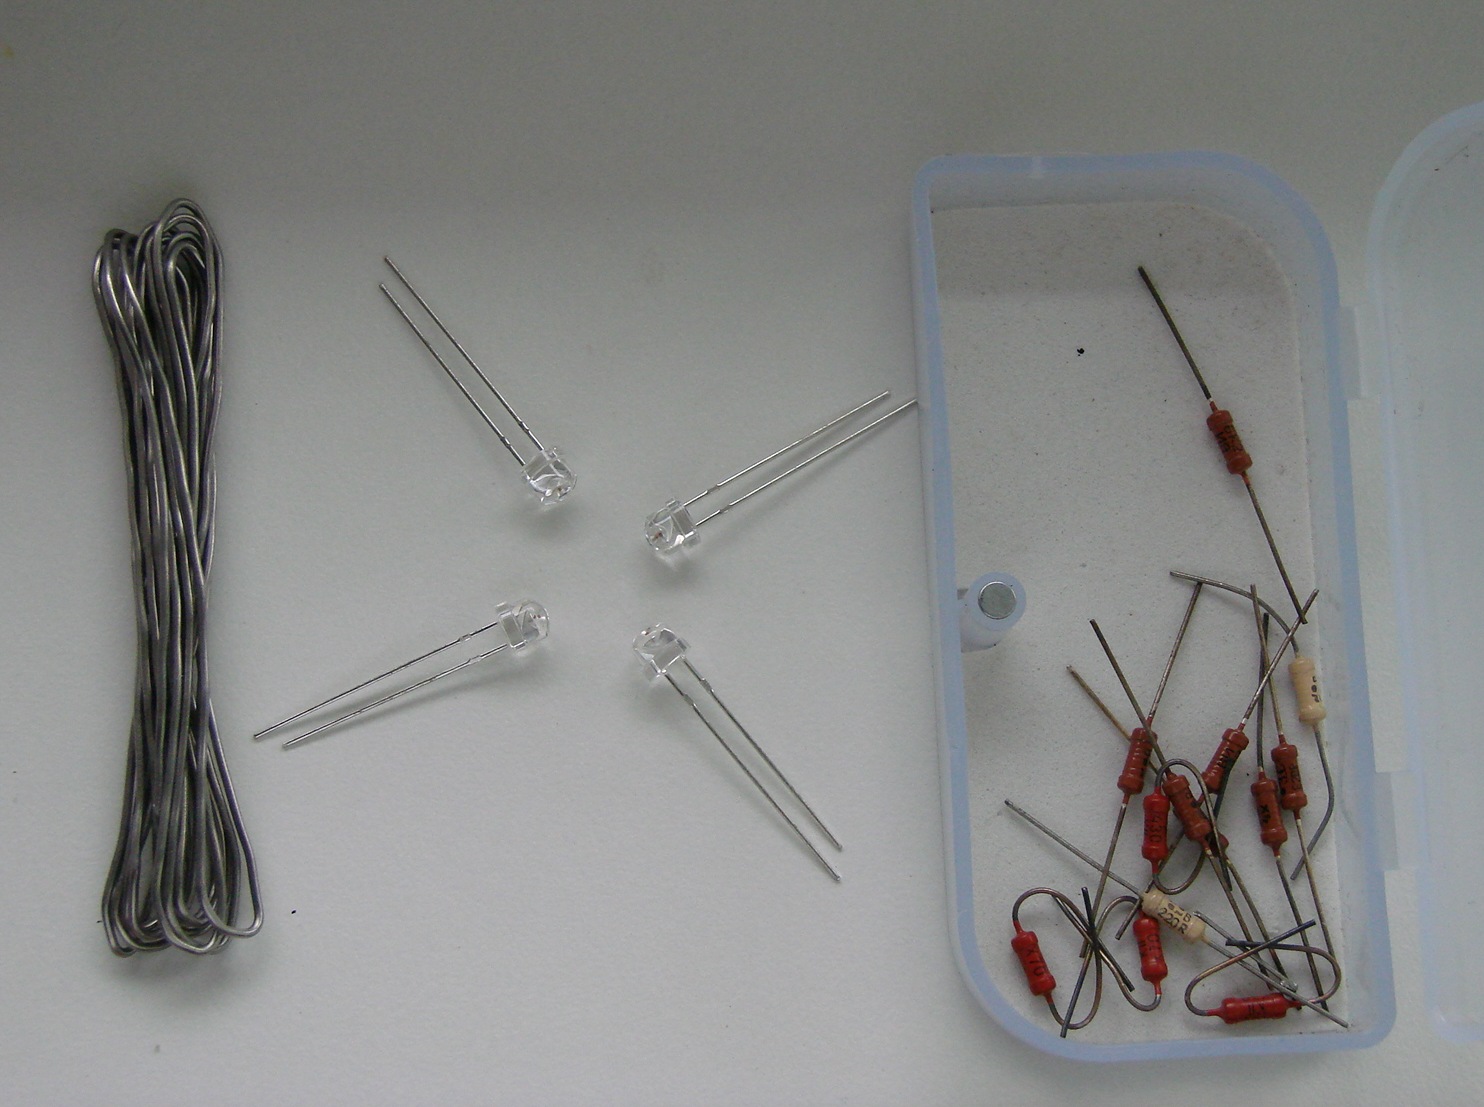 The second life of rear reflectors - diodes to replace the standard rear PTF - Toyota Corolla 16 L 2007